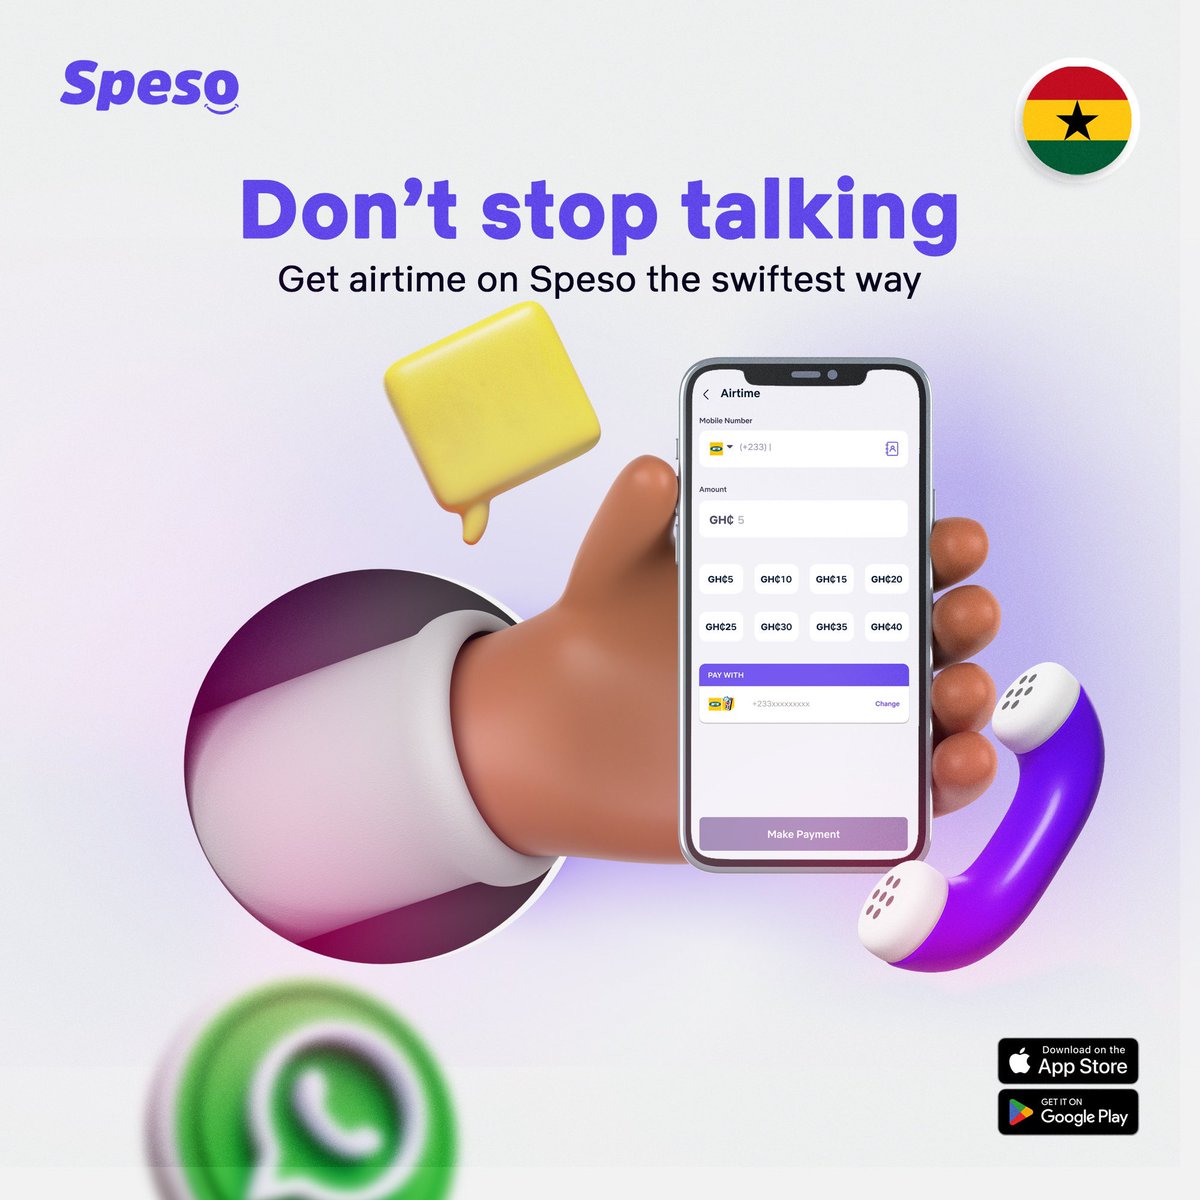 Keep going, keep talking! 🇬🇭
Don’t stress over airtime when you have Speso 

Buy airtime and data on all networks 
It’s fast and reliable 

Switch to Speso now!!! 

#speso #MTN #airtelTigo #vodafone #datatopup #airtime